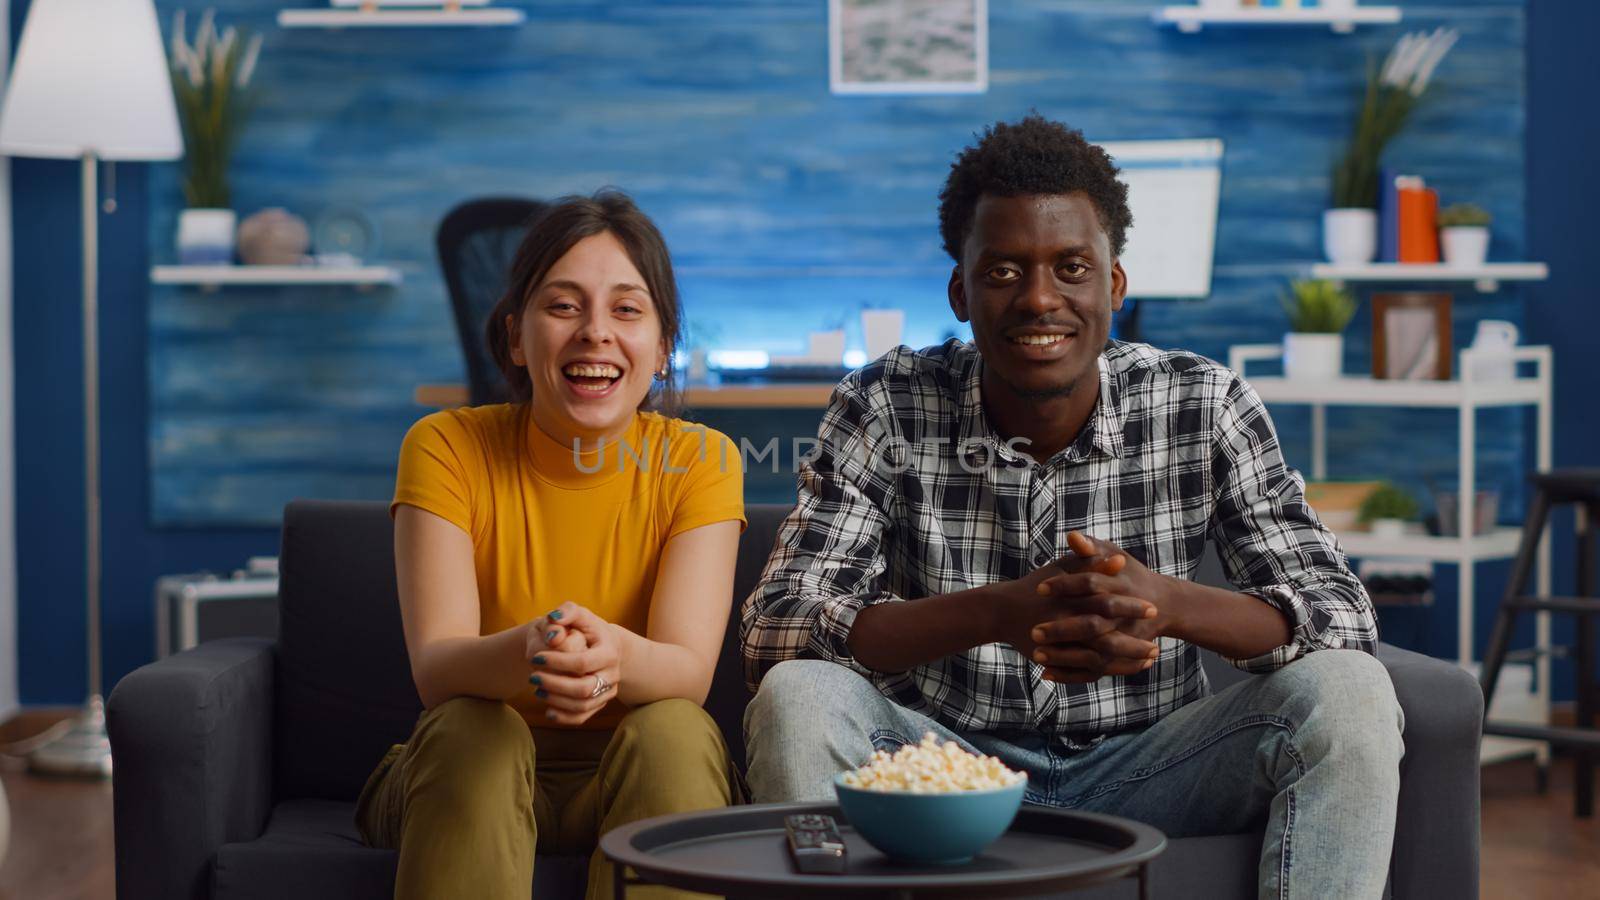 Interracial couple waving at camera on video call conference for remote communication in living room. Young mixed race partners talking to friends on internet online while sitting on sofa.